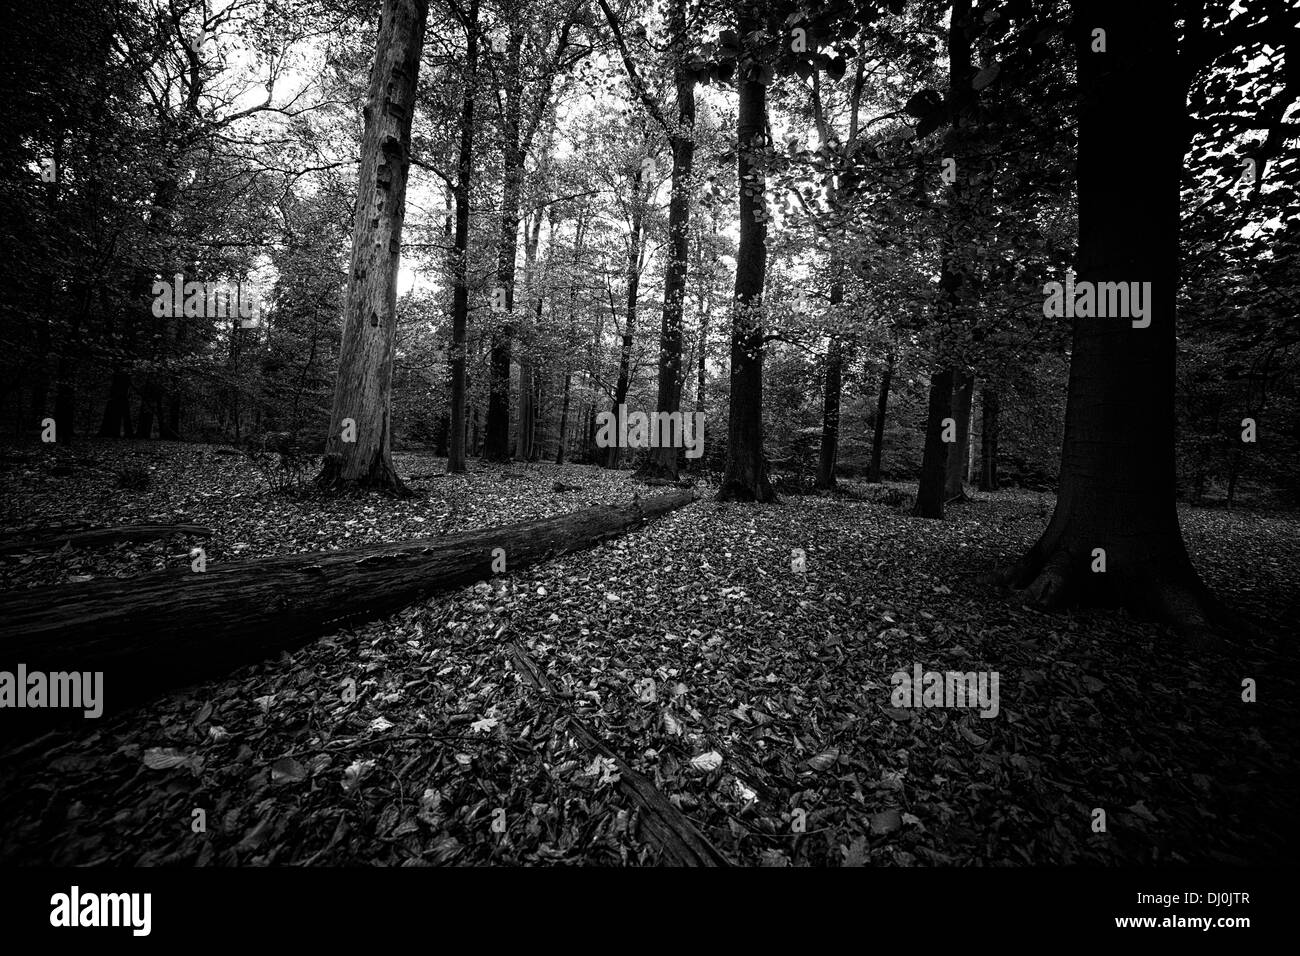 Gloomy landscape in a wood black and white Stock Photo